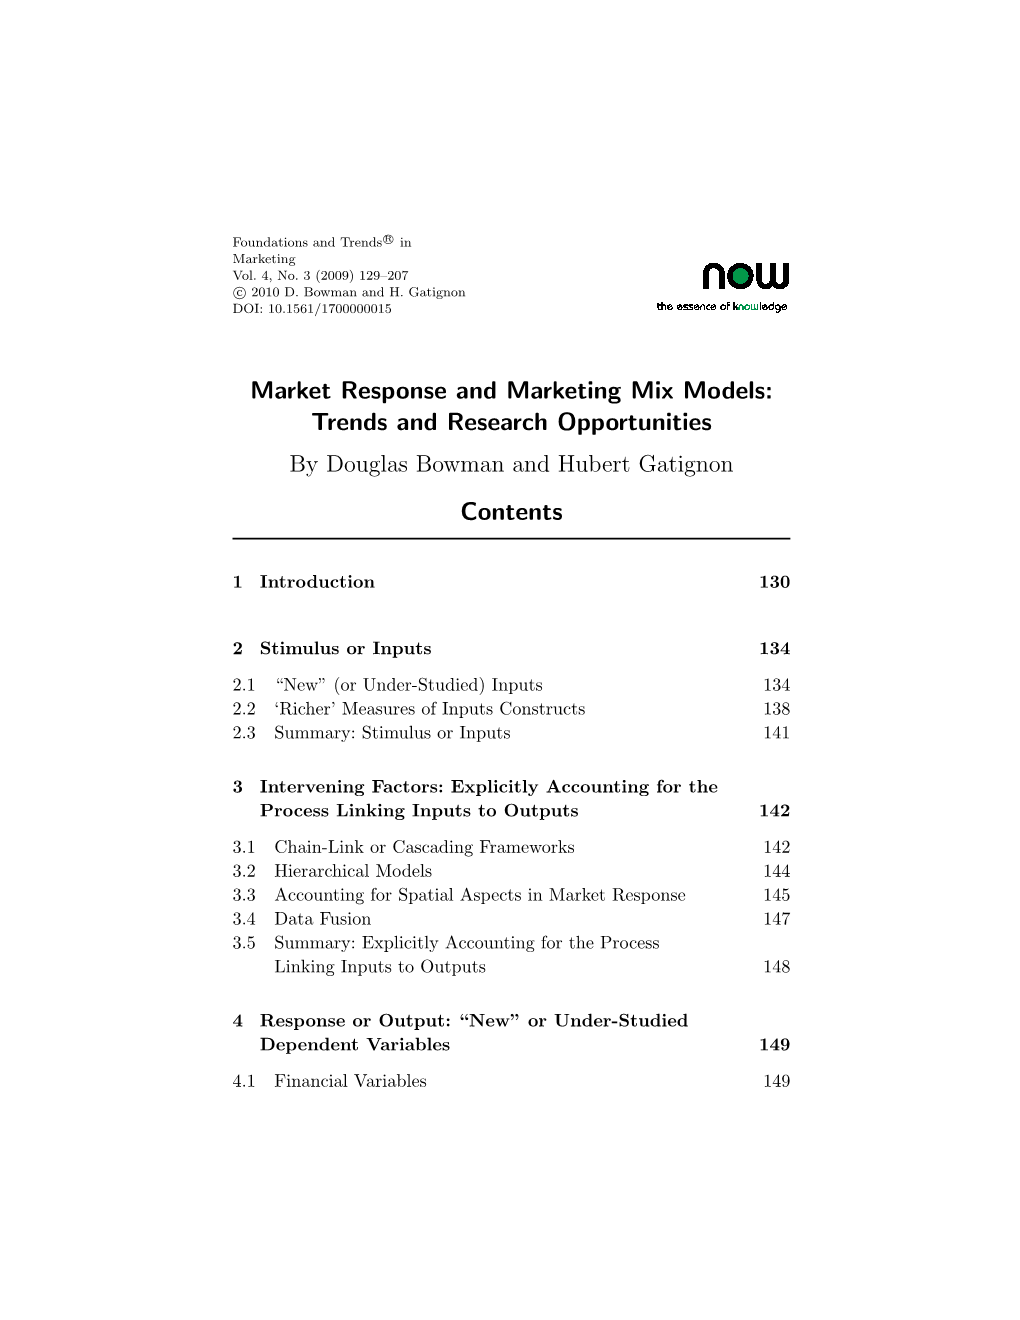 Market Response and Marketing Mix Models: Trends and Research Opportunities by Douglas Bowman and Hubert Gatignon Contents